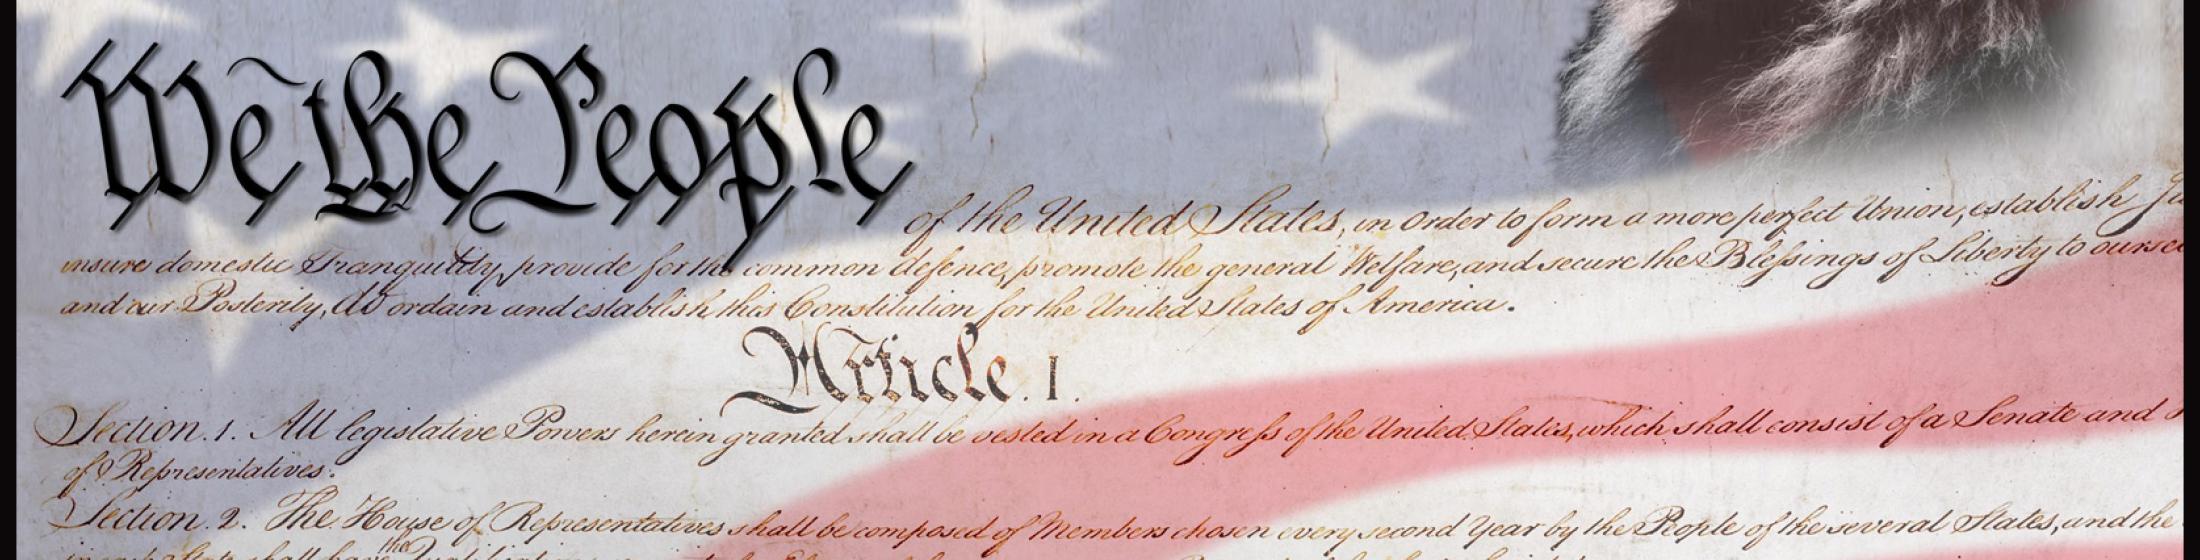 The words of the U.S. Constitution imposed over the American Flag